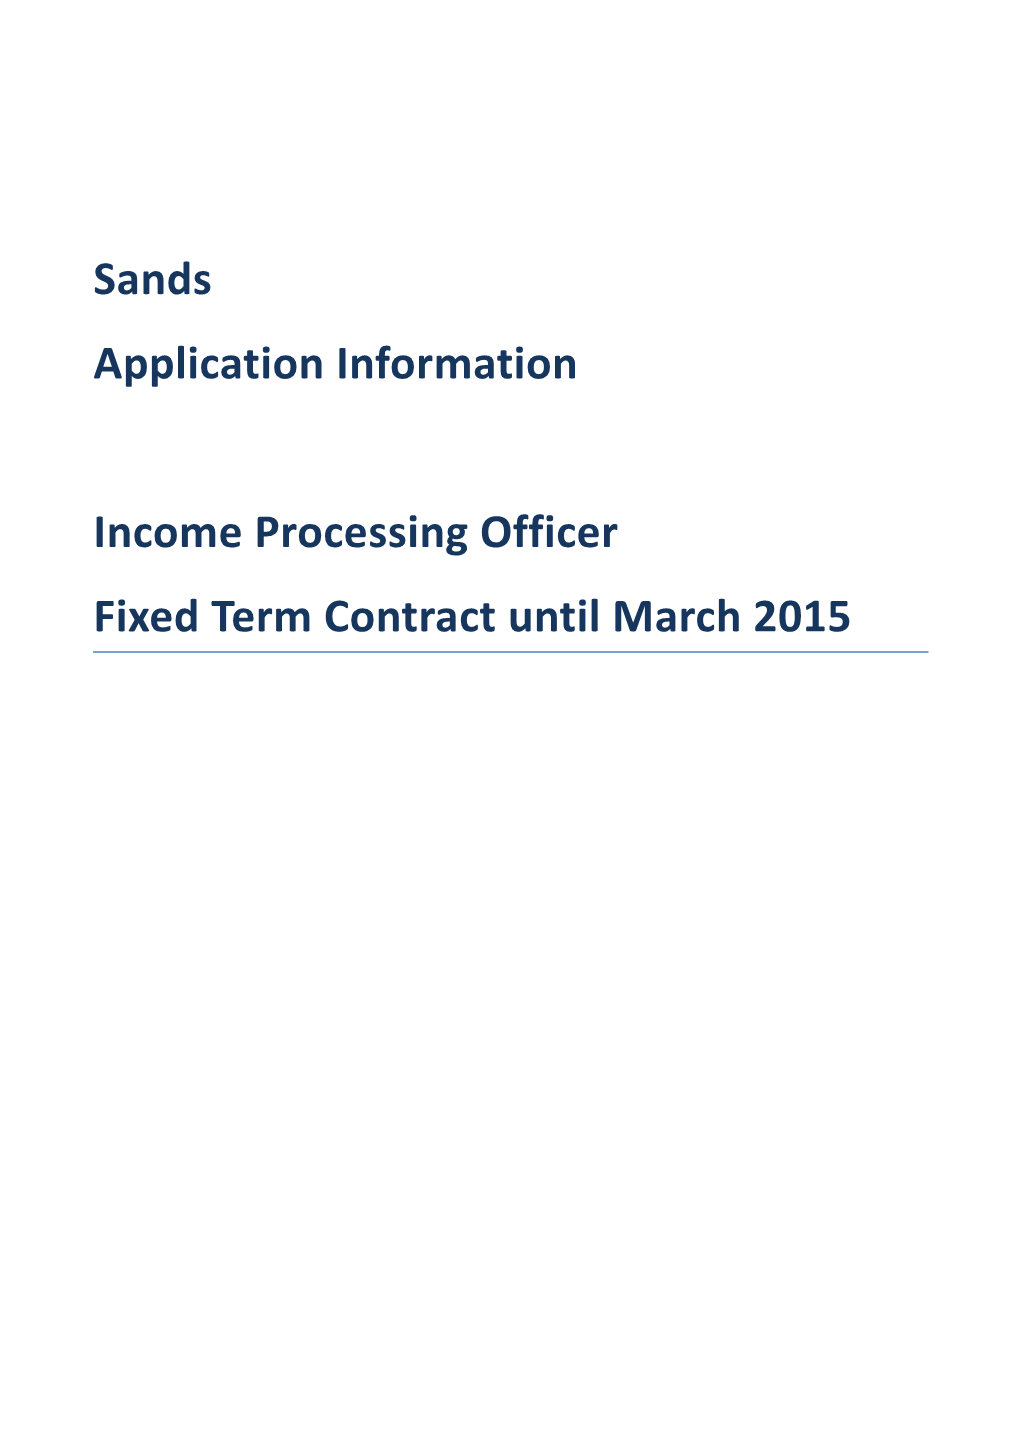 Income Processing Officer